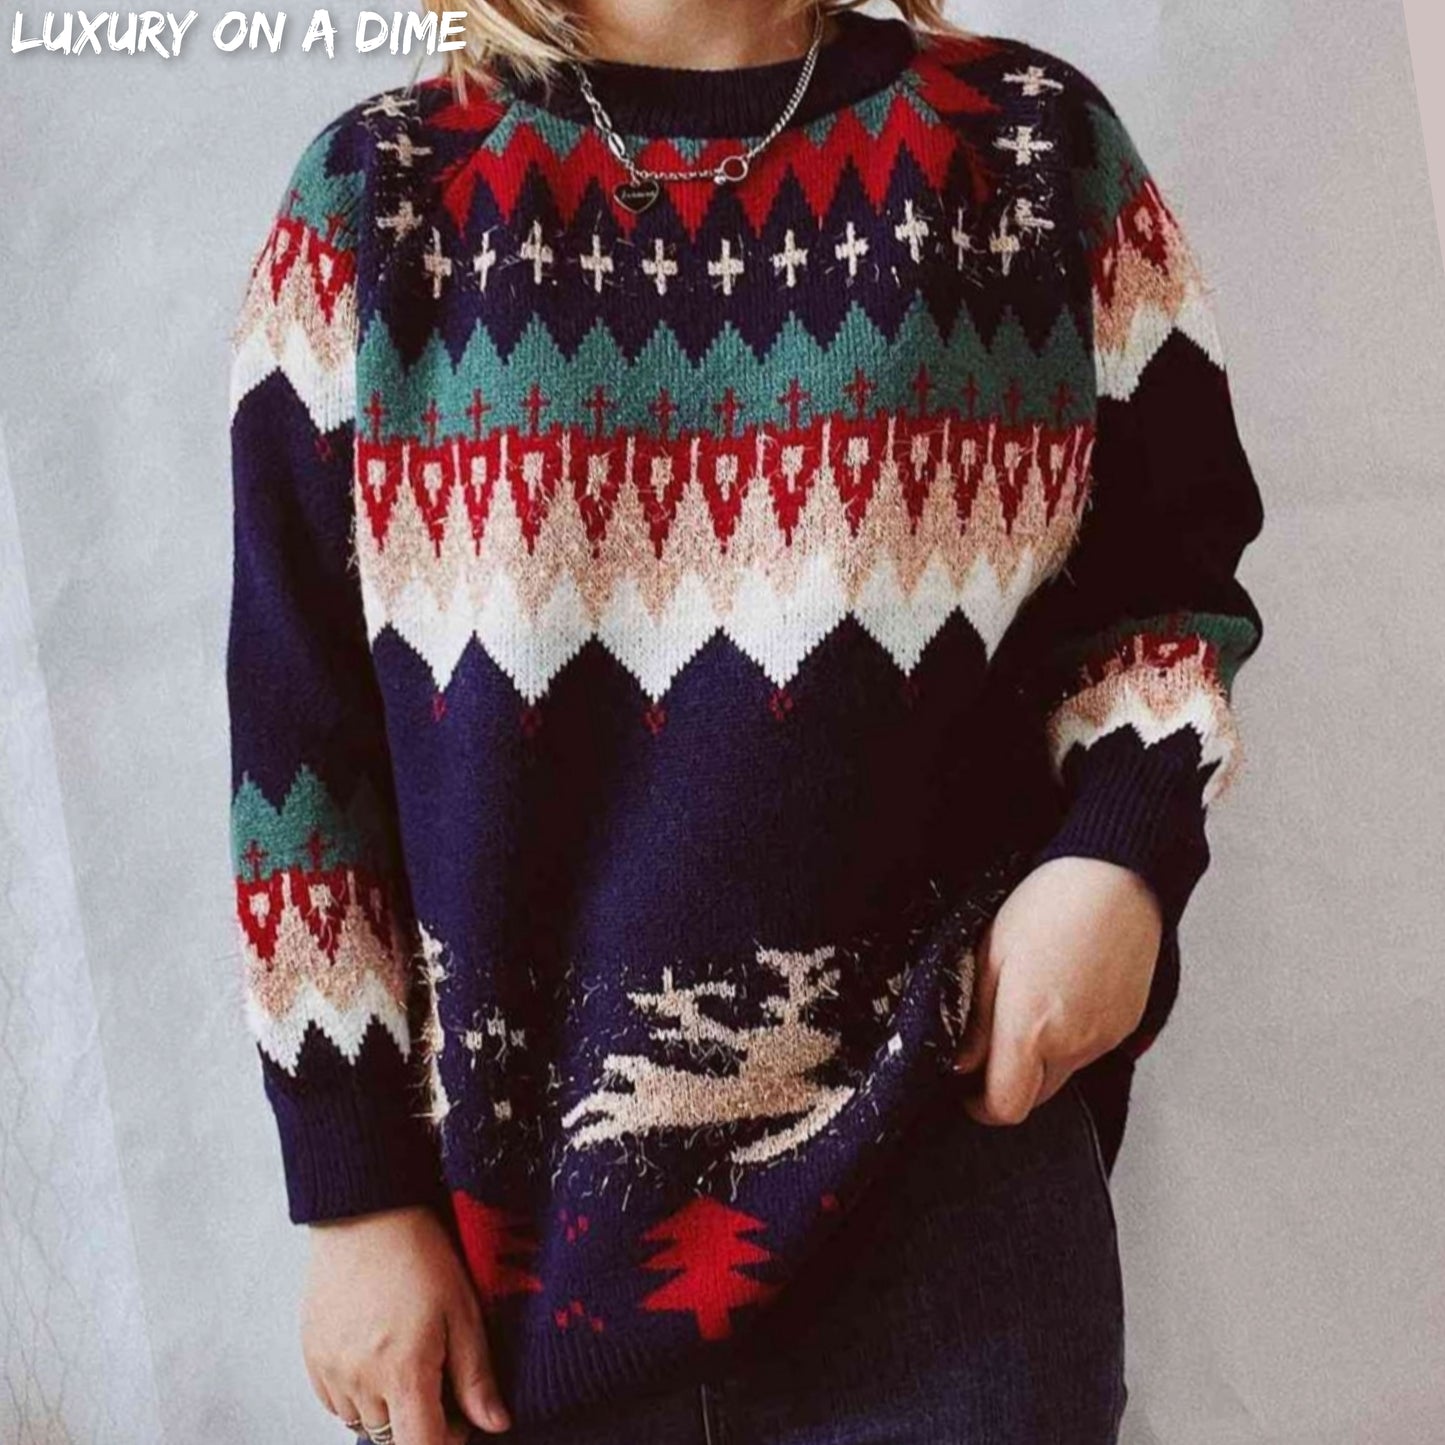 Reindeer Bold Knit Round Neck Classy Holiday Fair Isle Christmas Sweater